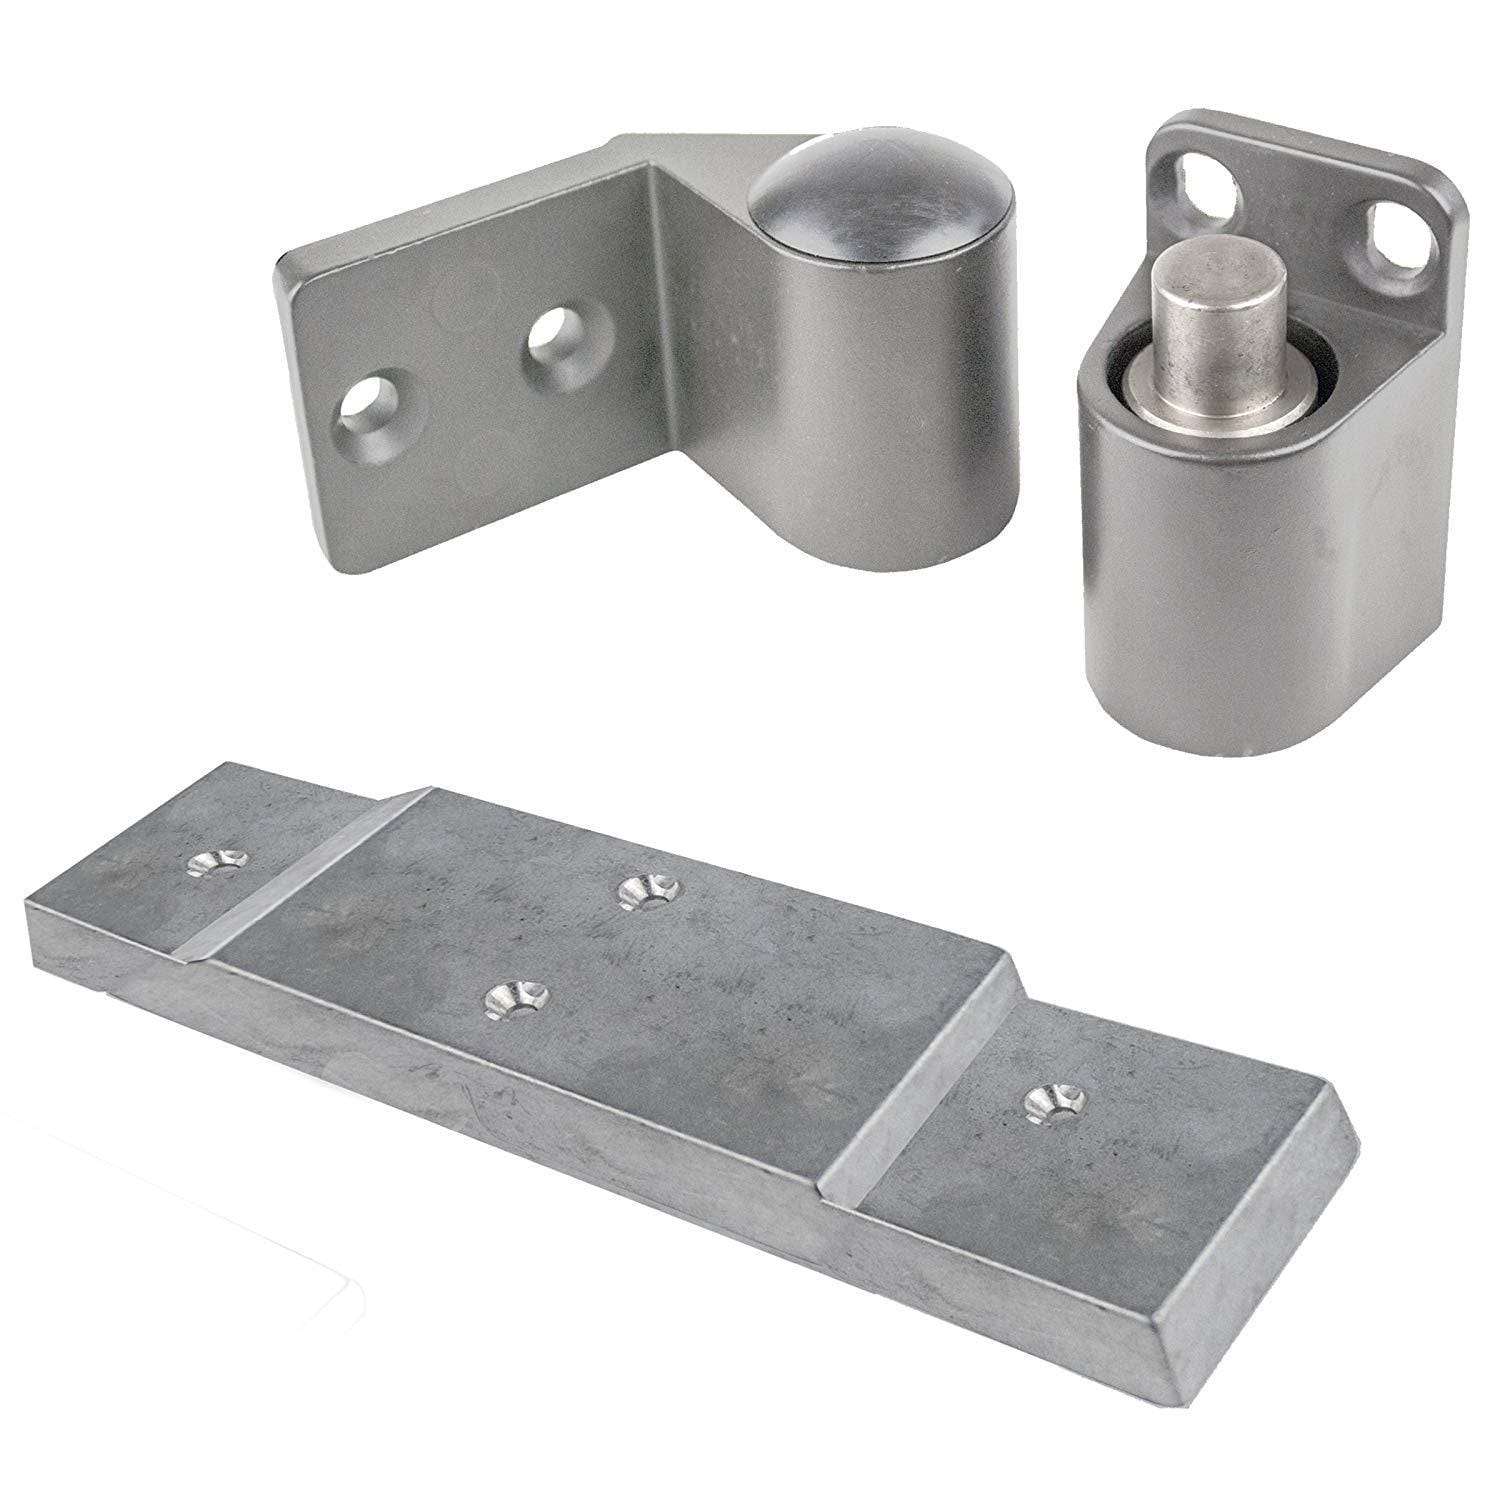 Intermediate Pivot Door Hinges Arch/Amarlite Style - Offset For Aluminum Doors - Face Frame Or 1/8" Recessed Applications